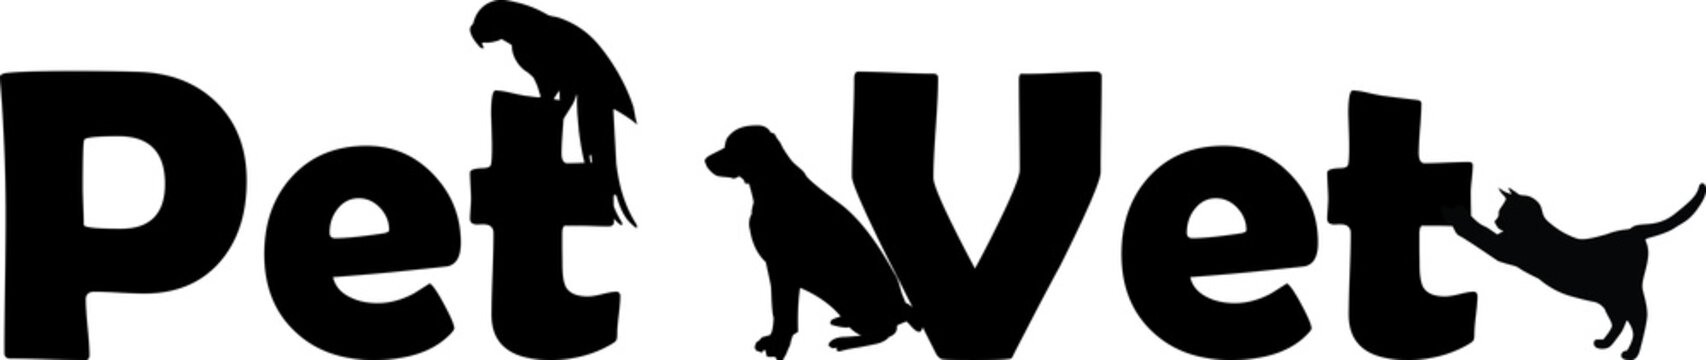 Veterinary Hospital logo: pet vet with dog, cat and parrot silhouette